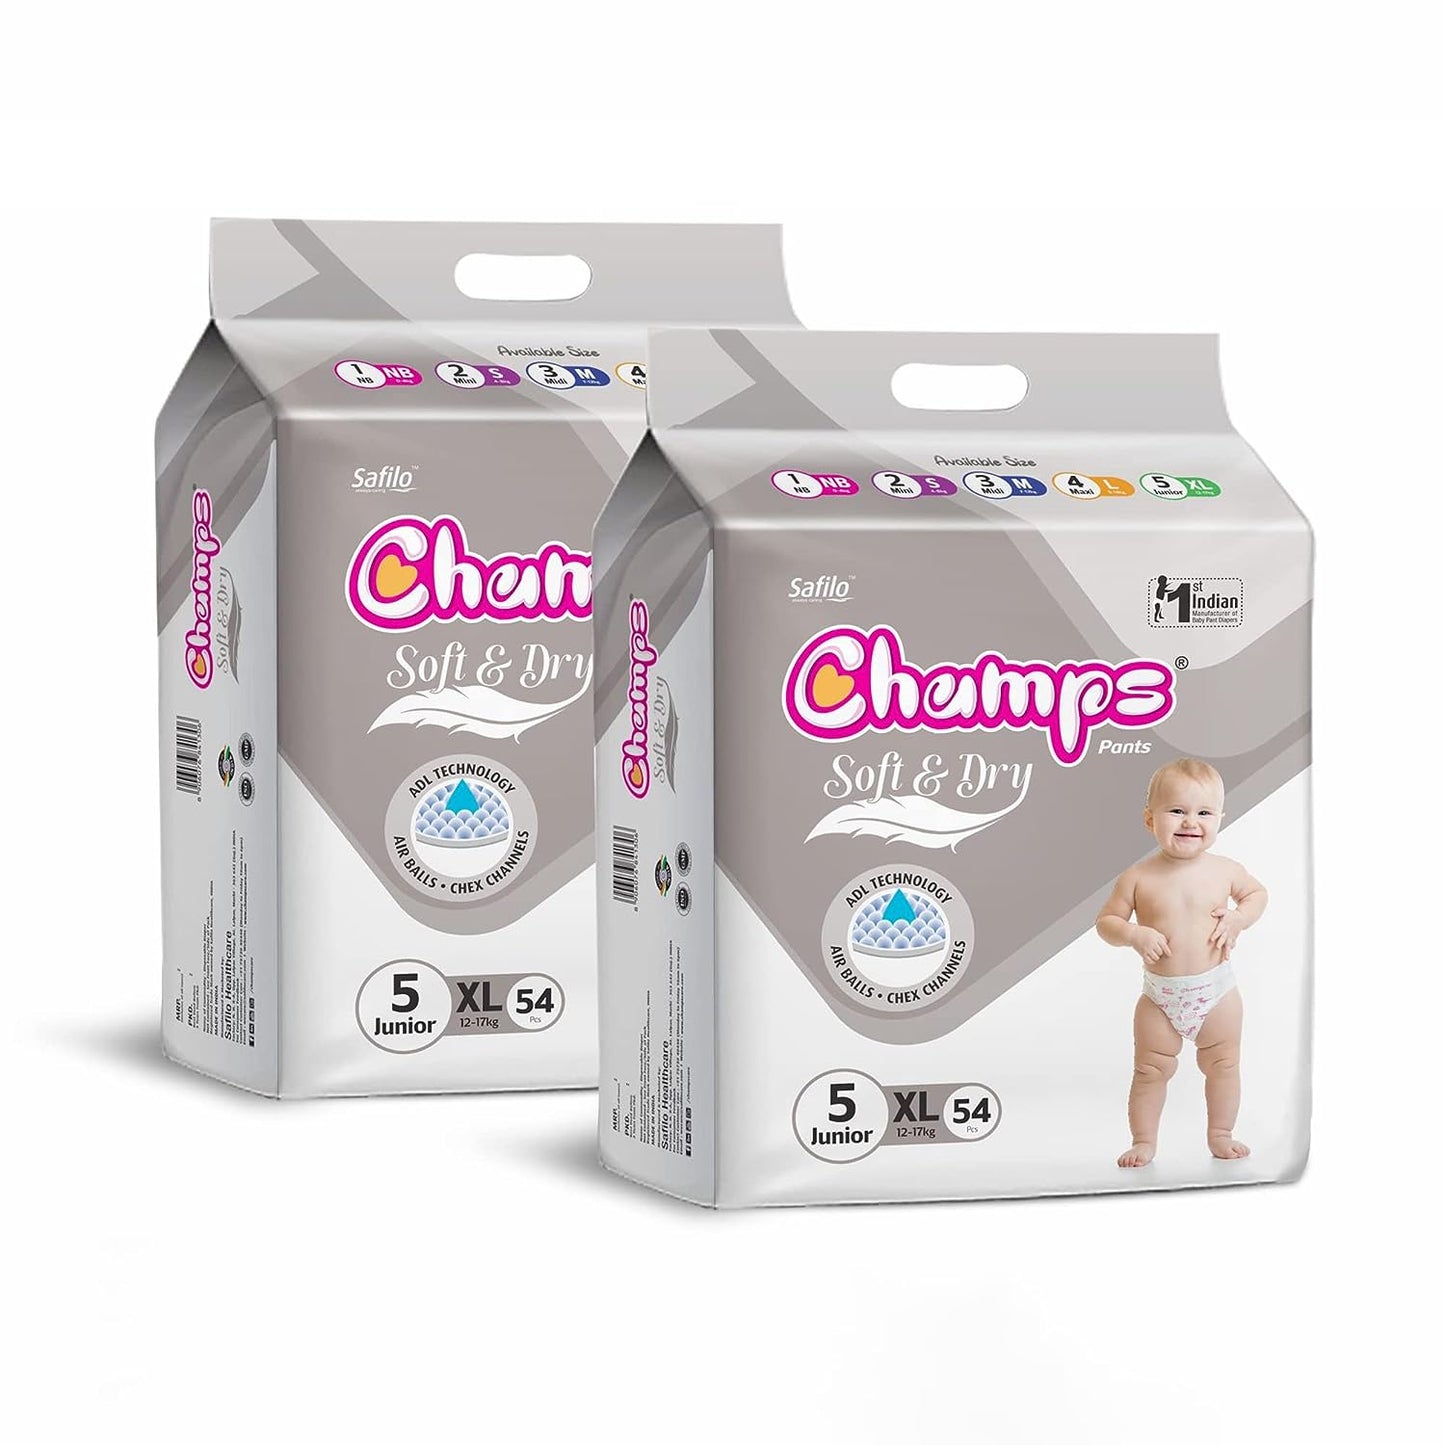 Baby Diaper High Absorbent Pant Diapers, Champs Soft and Dry Baby Diaper Pants XL 54 Pcs (Extra Large, XL54 Pieces)